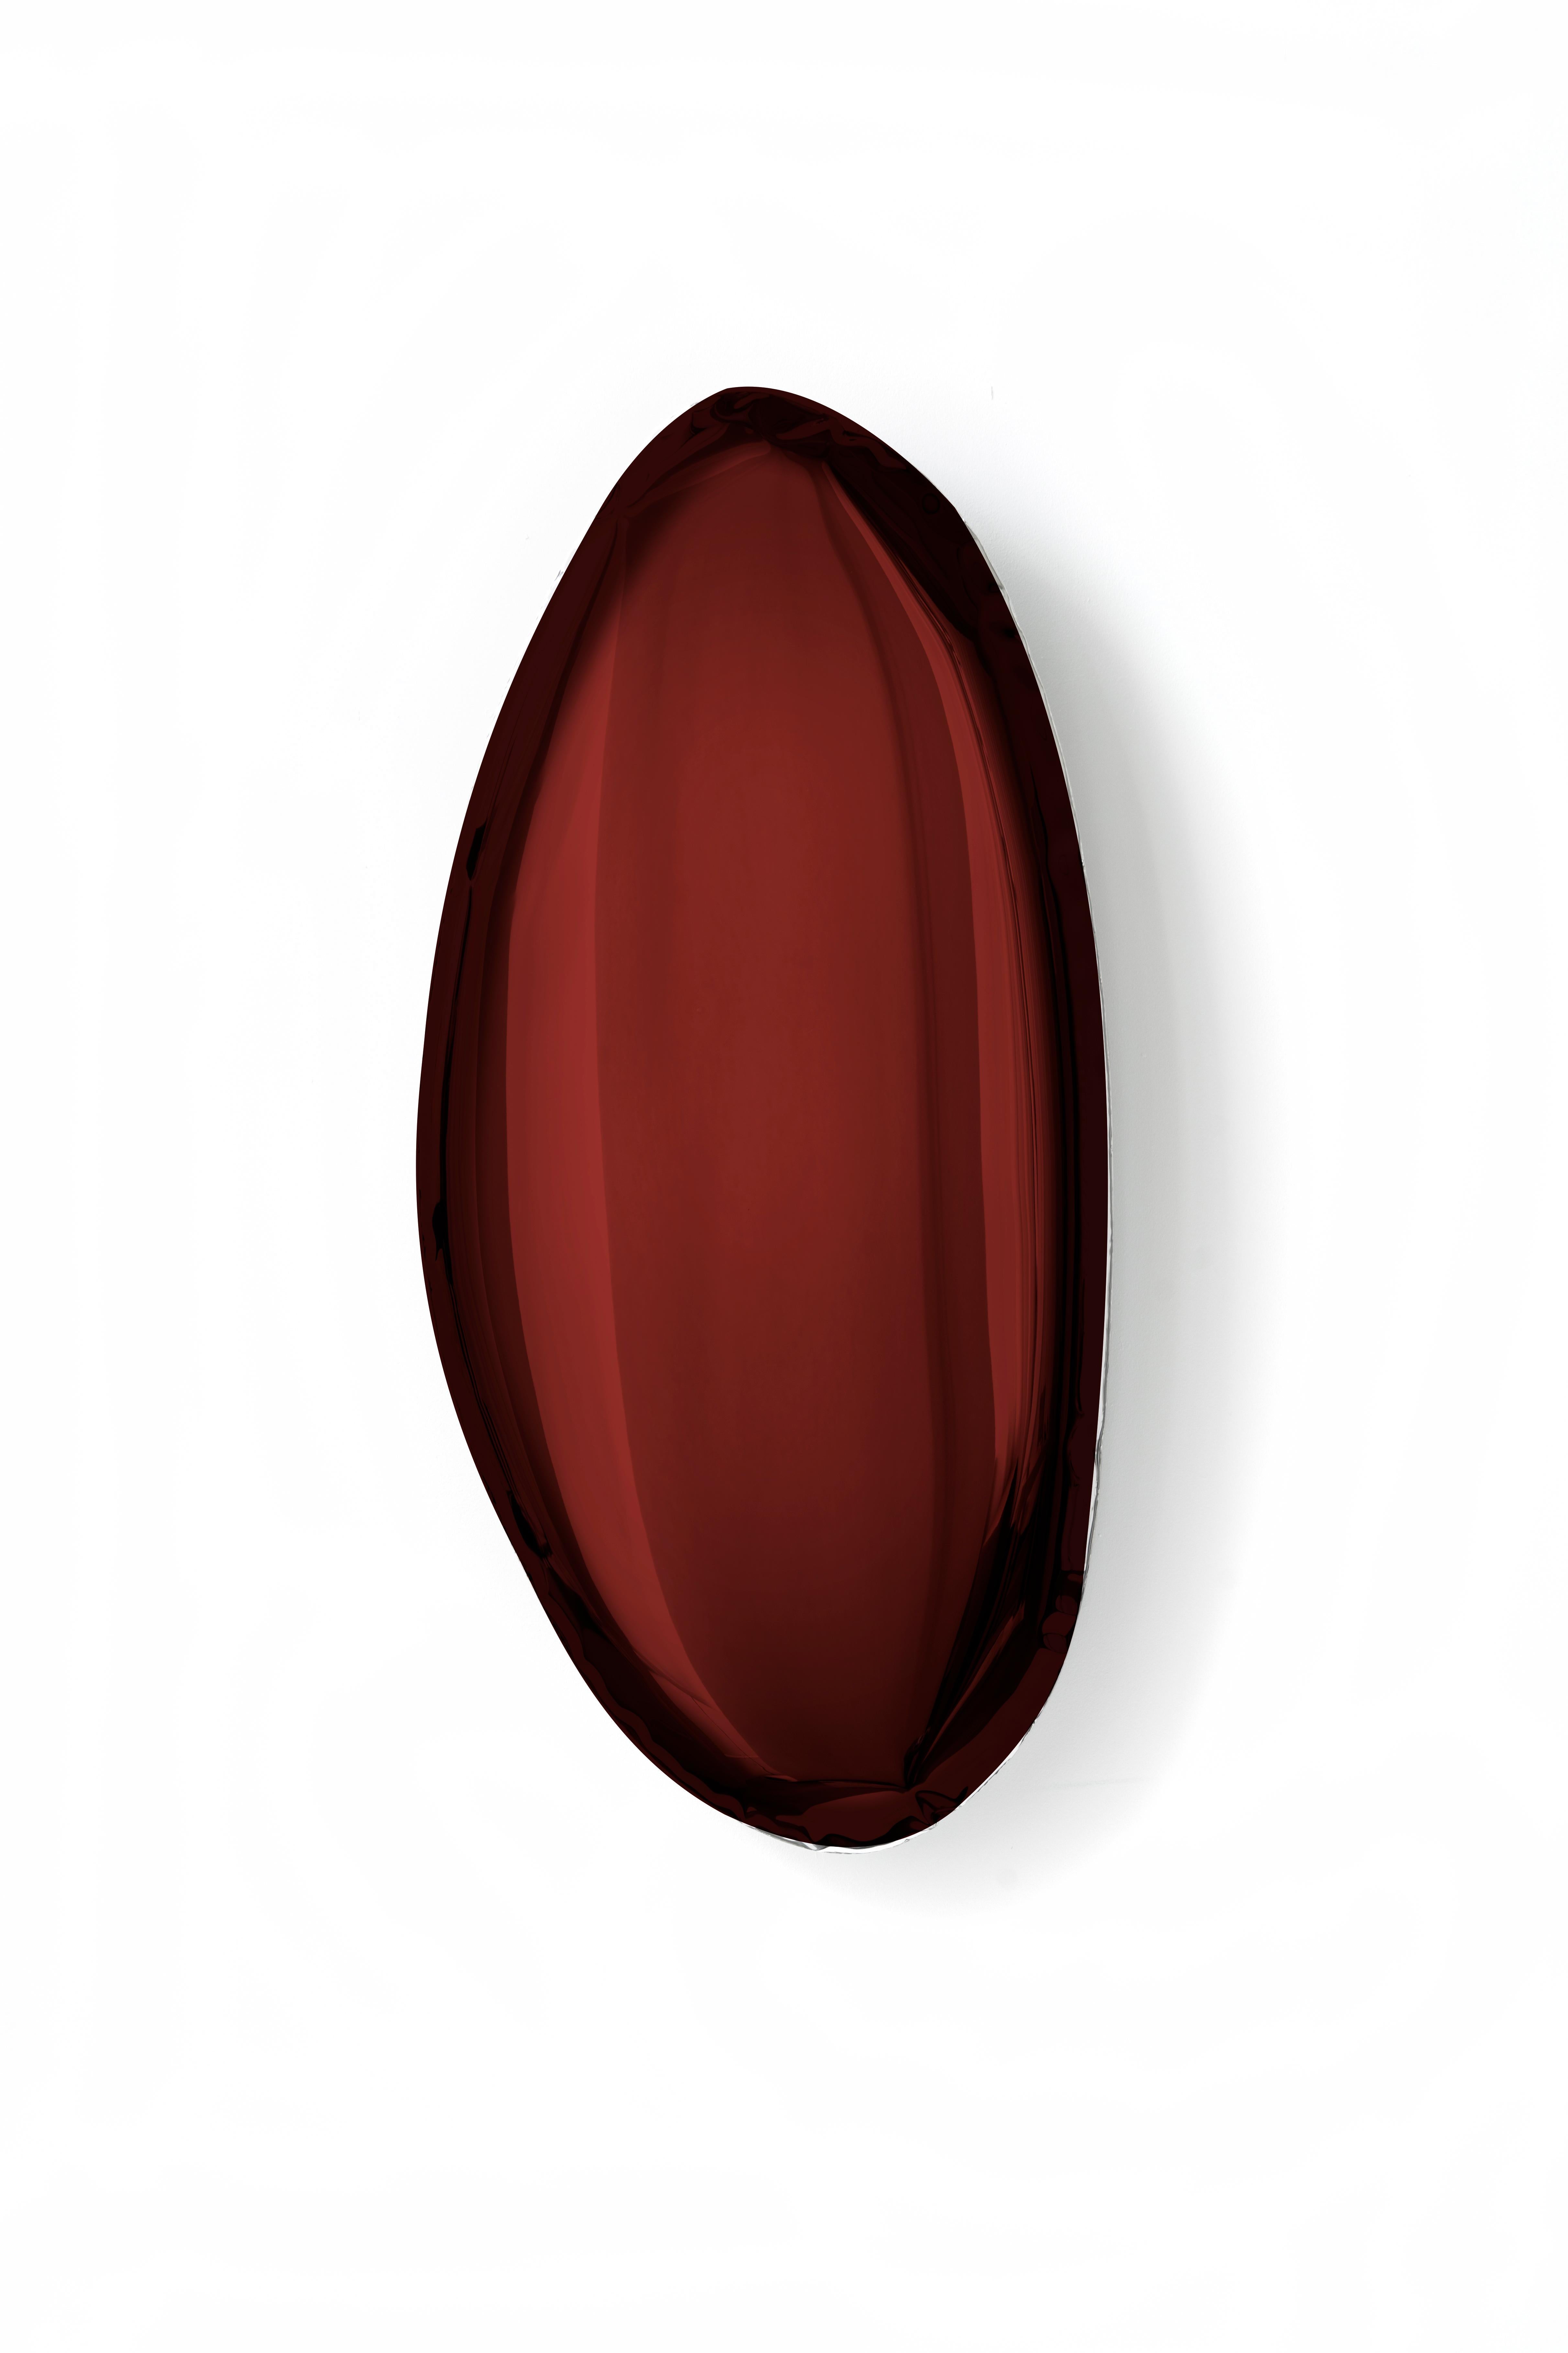 Mirror Tafla O3 Rubin Red, in Polished Stainless Steel by Zieta In New Condition For Sale In Paris, FR